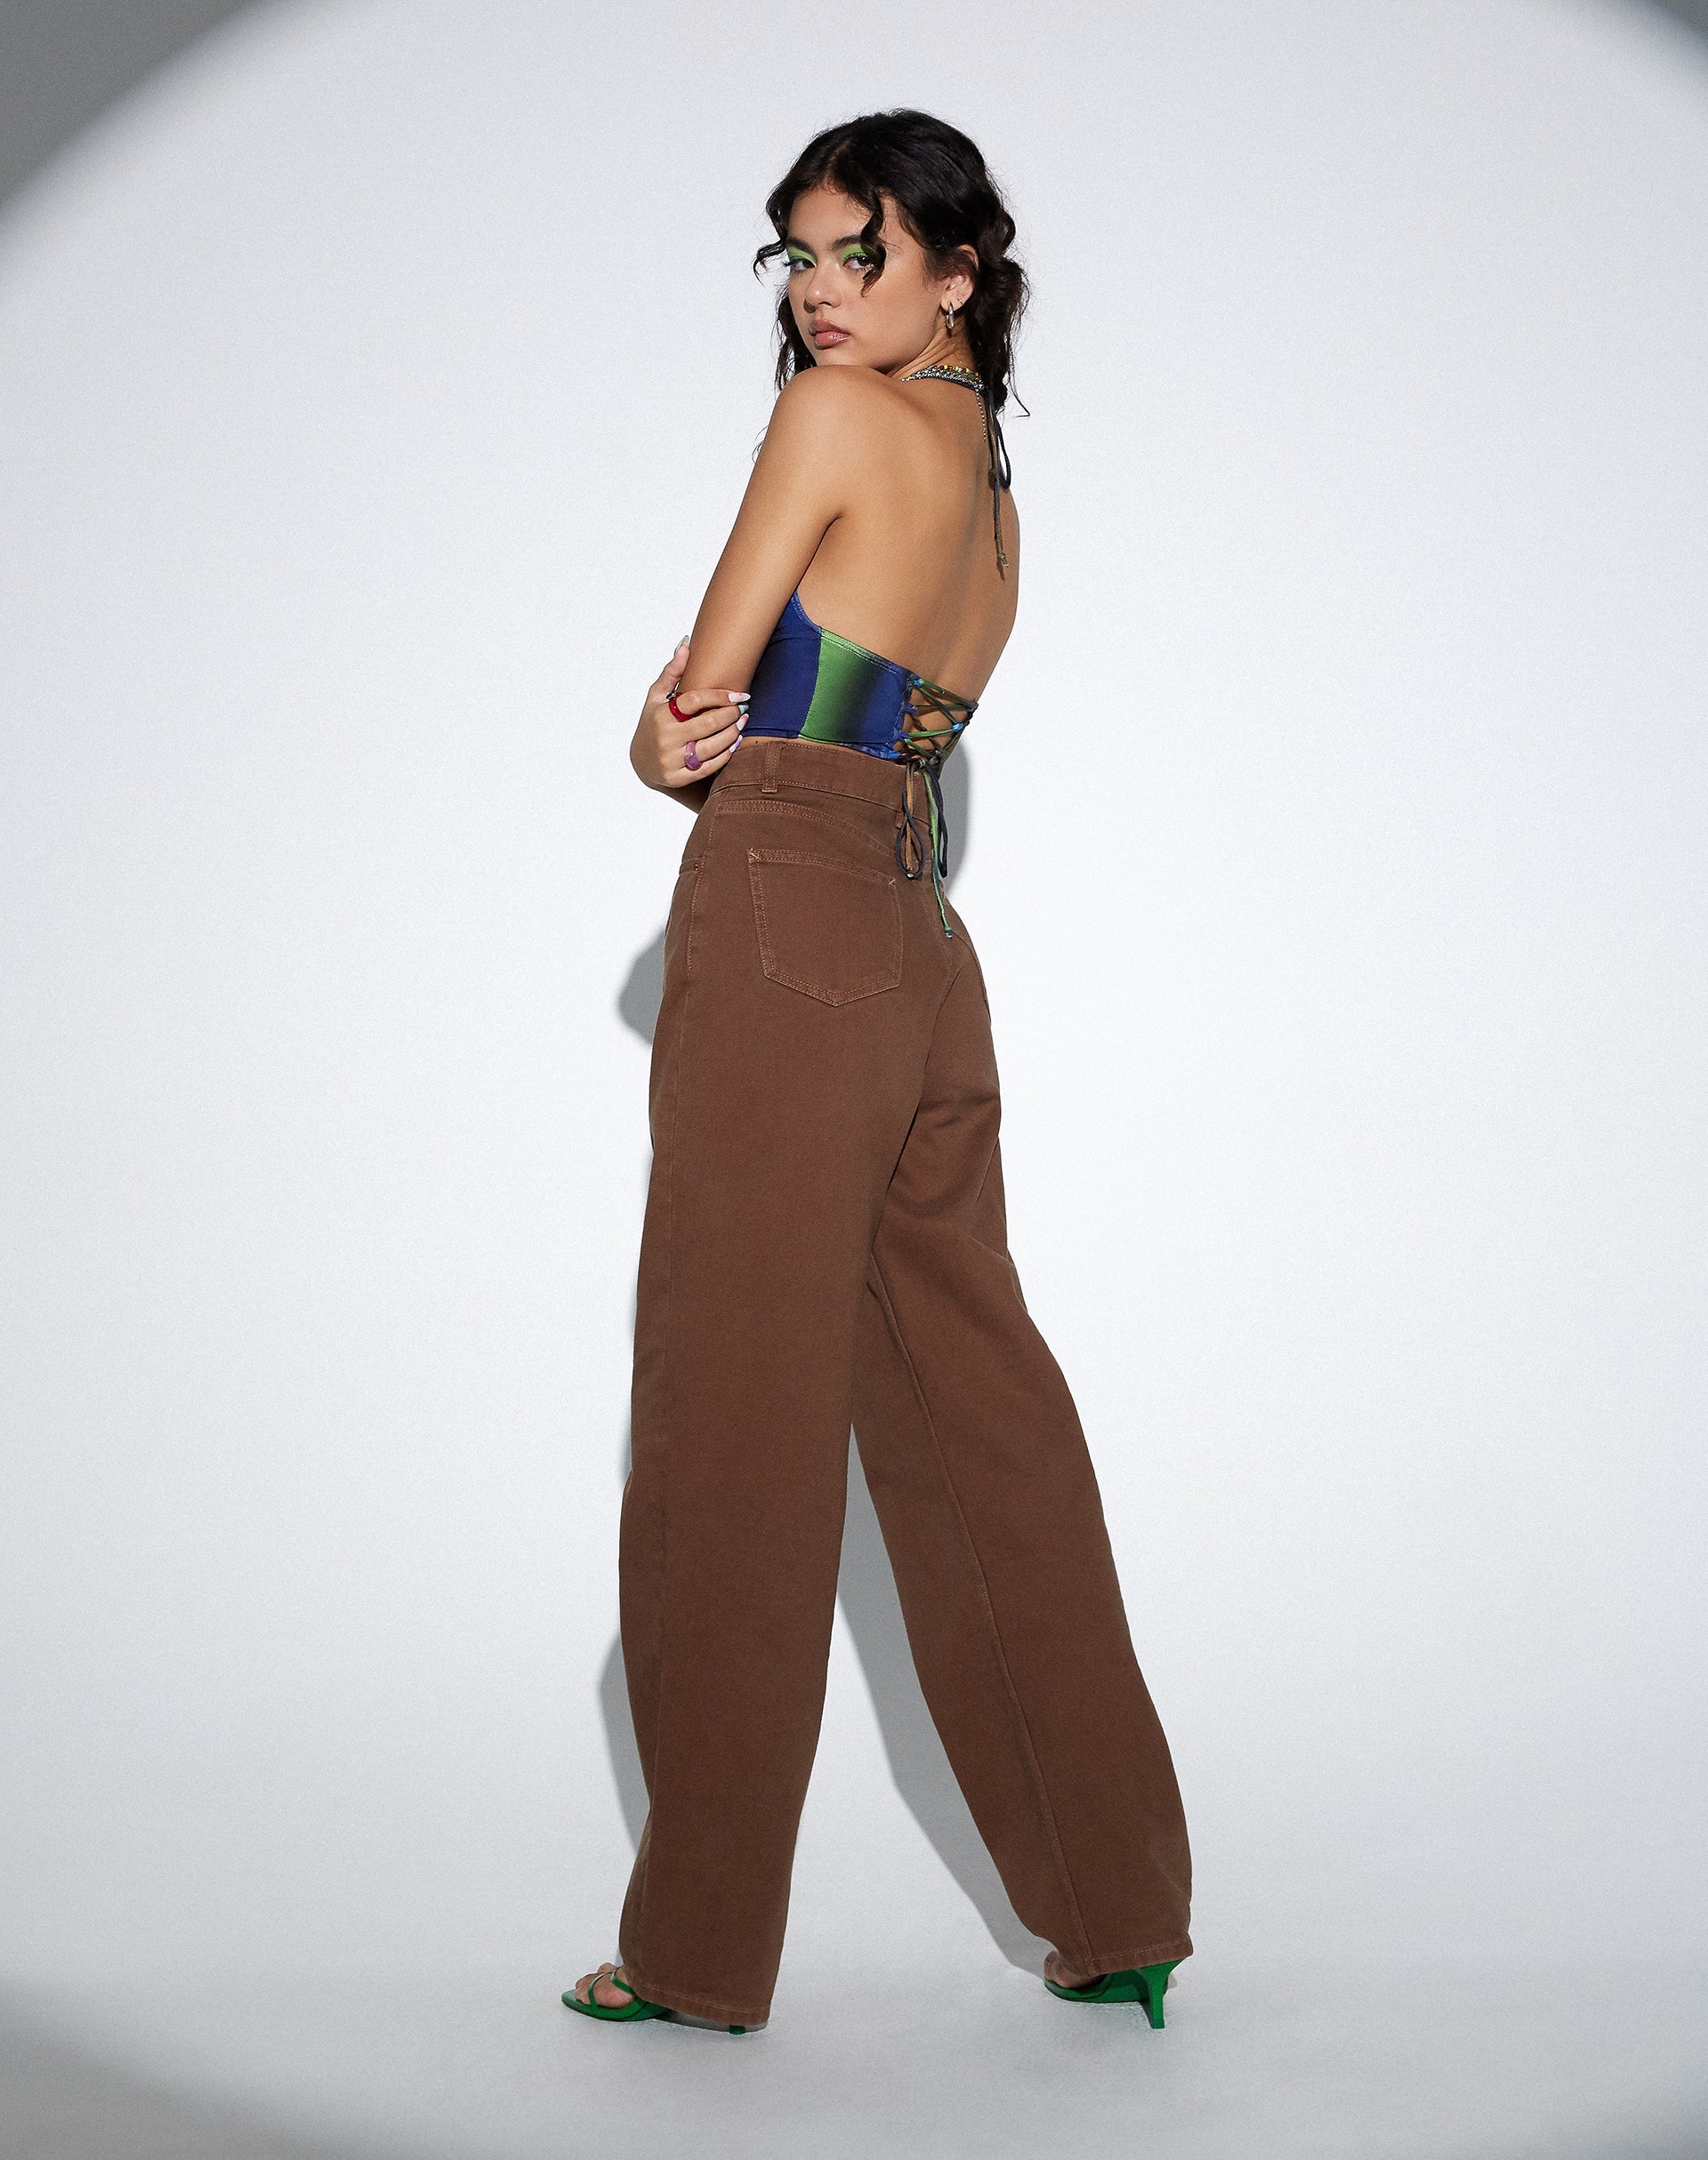 Image of MOTEL X OLIVIA NEILL Parallel Jeans in Rich Brown